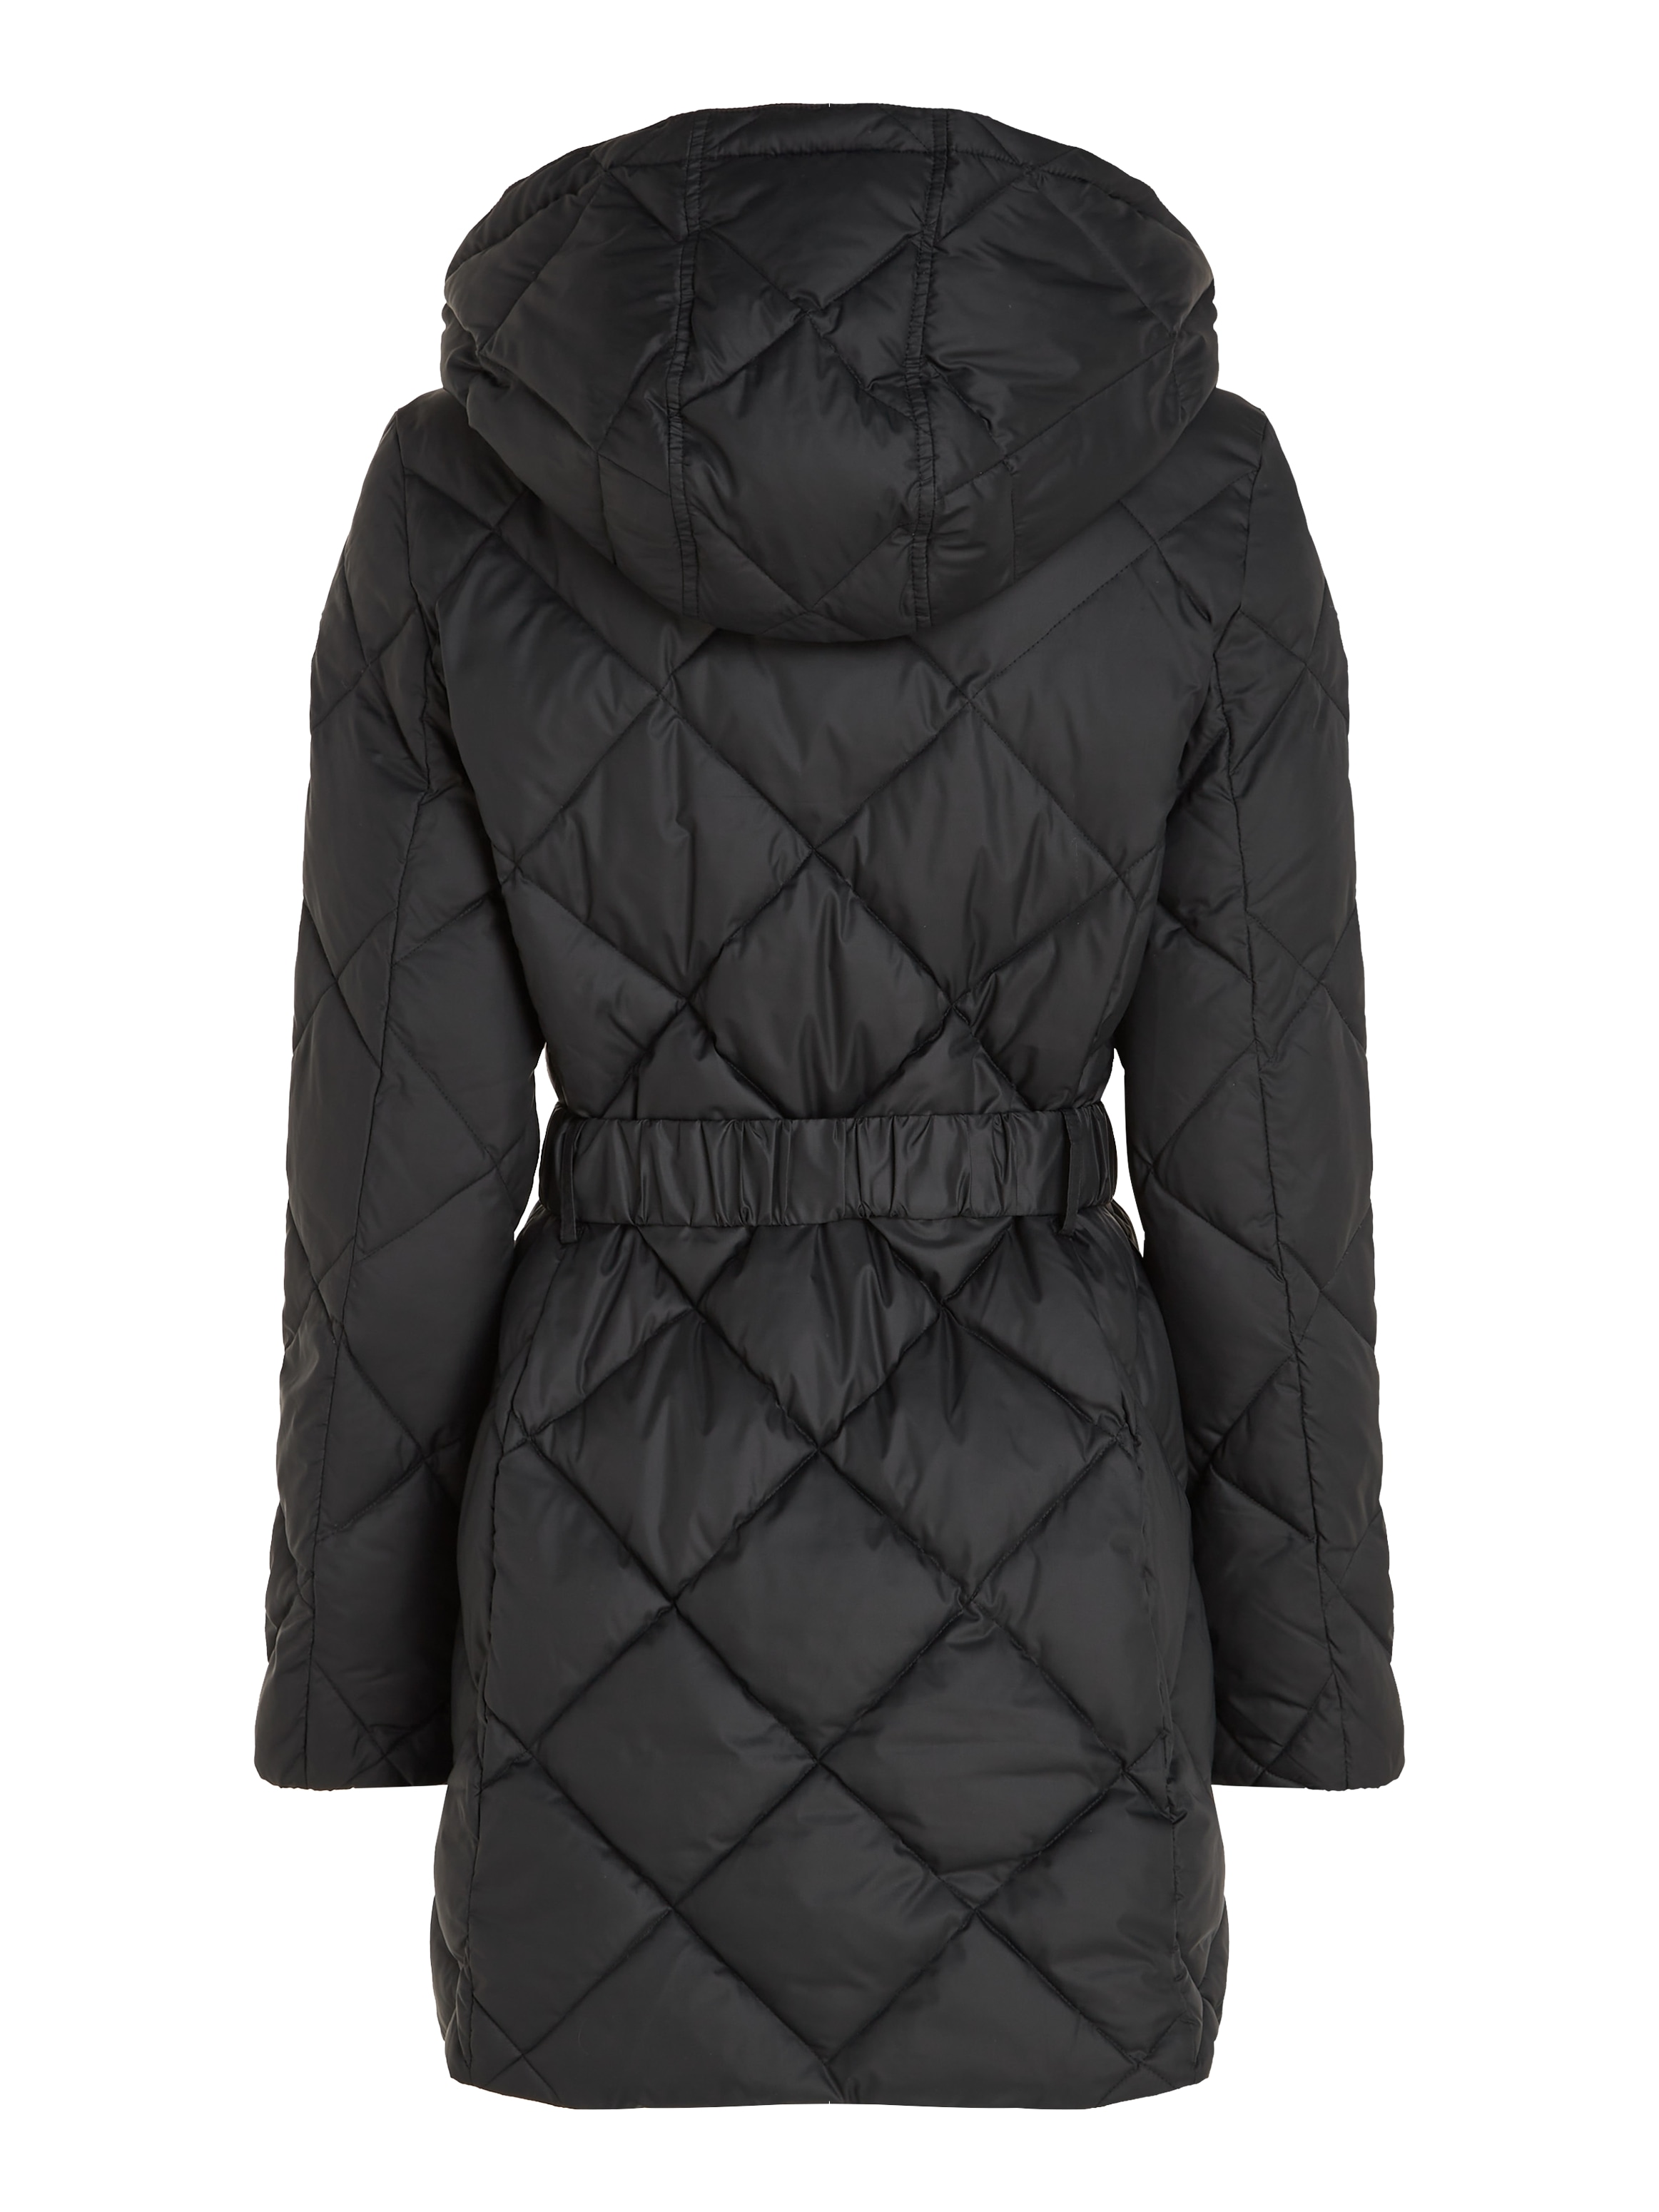 Tommy Hilfiger Steppmantel »ELEVATED QUILTED COAT«, abnehmbarer BELTED kaufen mit Kapuze